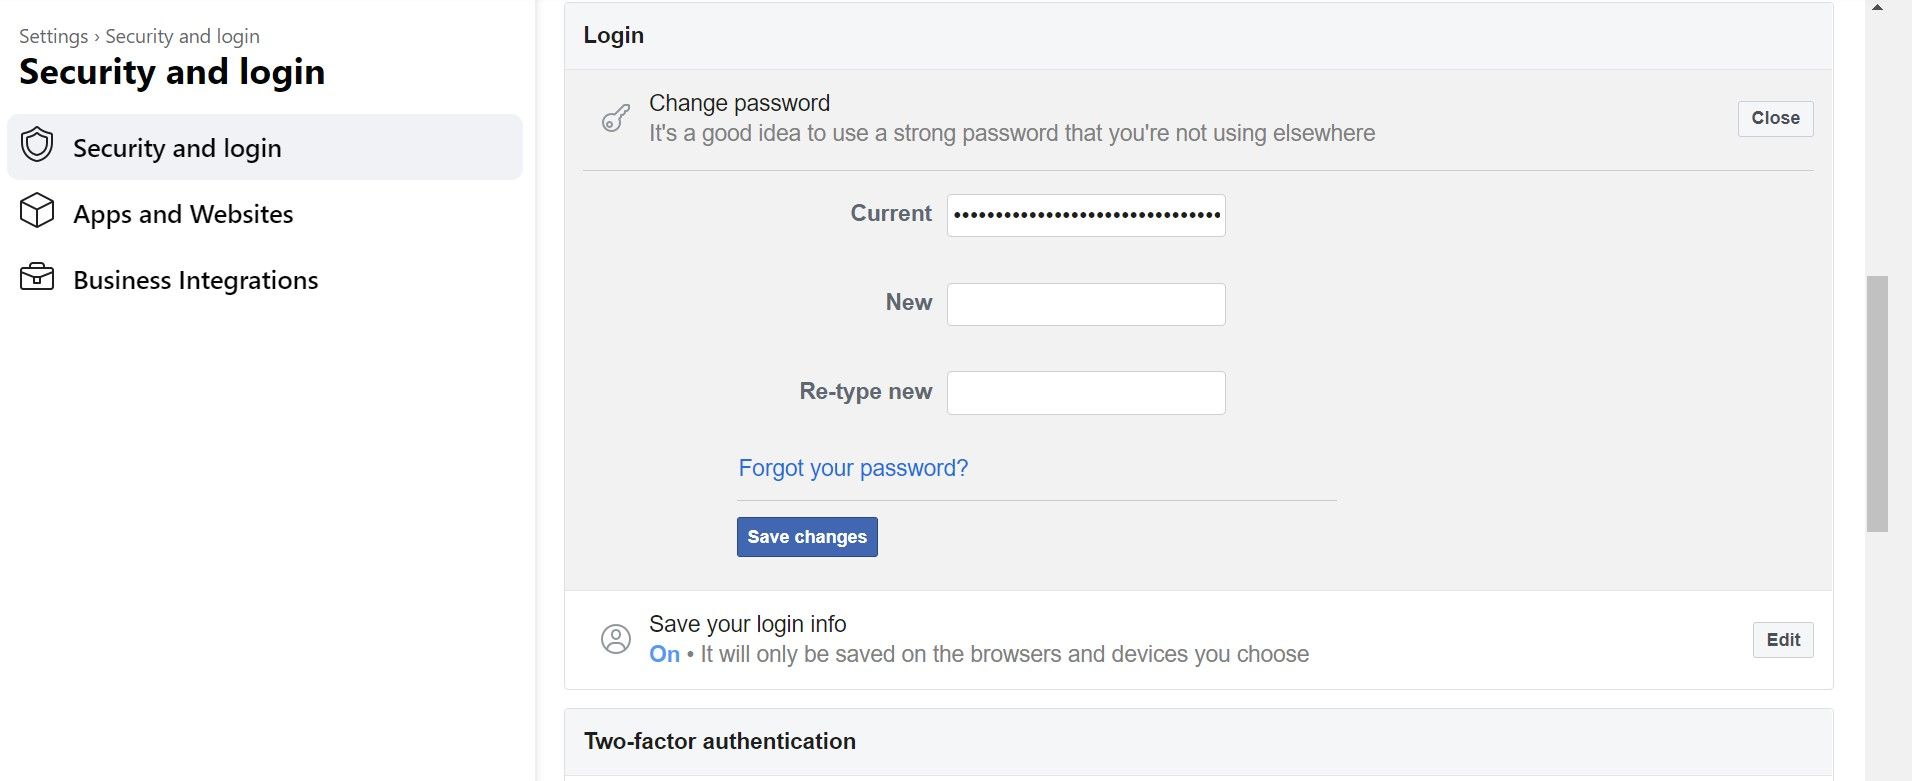 screenshot of change password page on Facebook